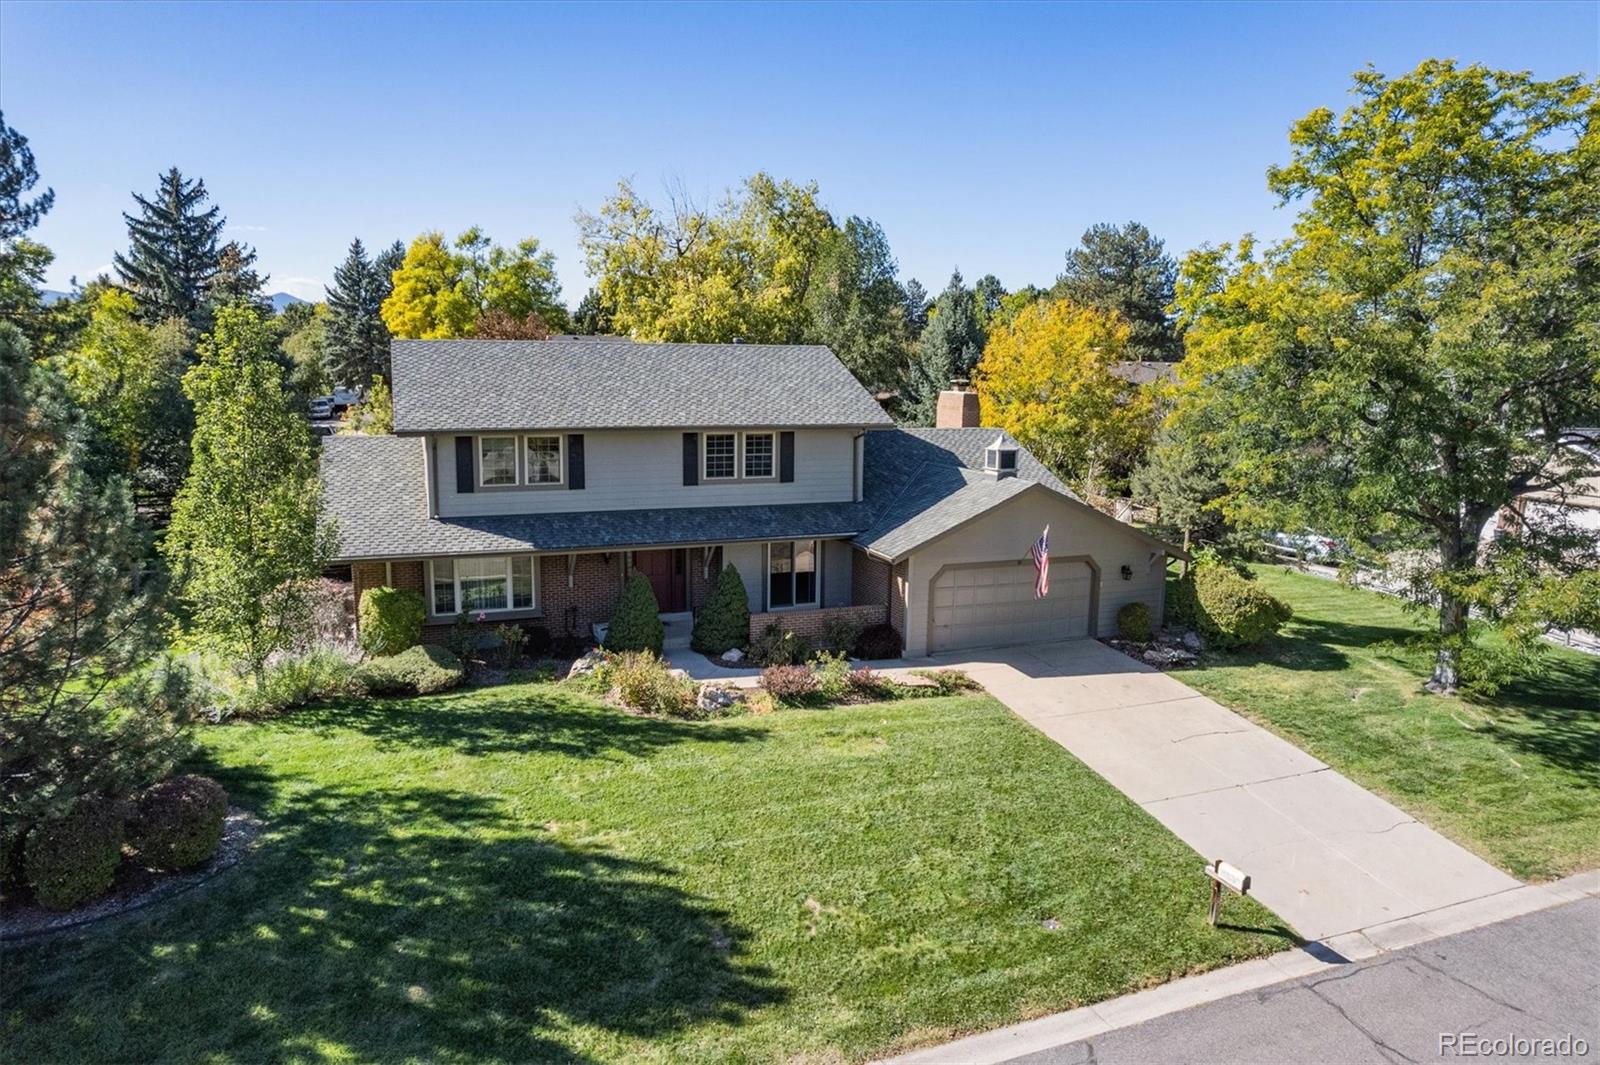 5871 s laurel place, Littleton sold home. Closed on 2023-12-22 for $975,000.